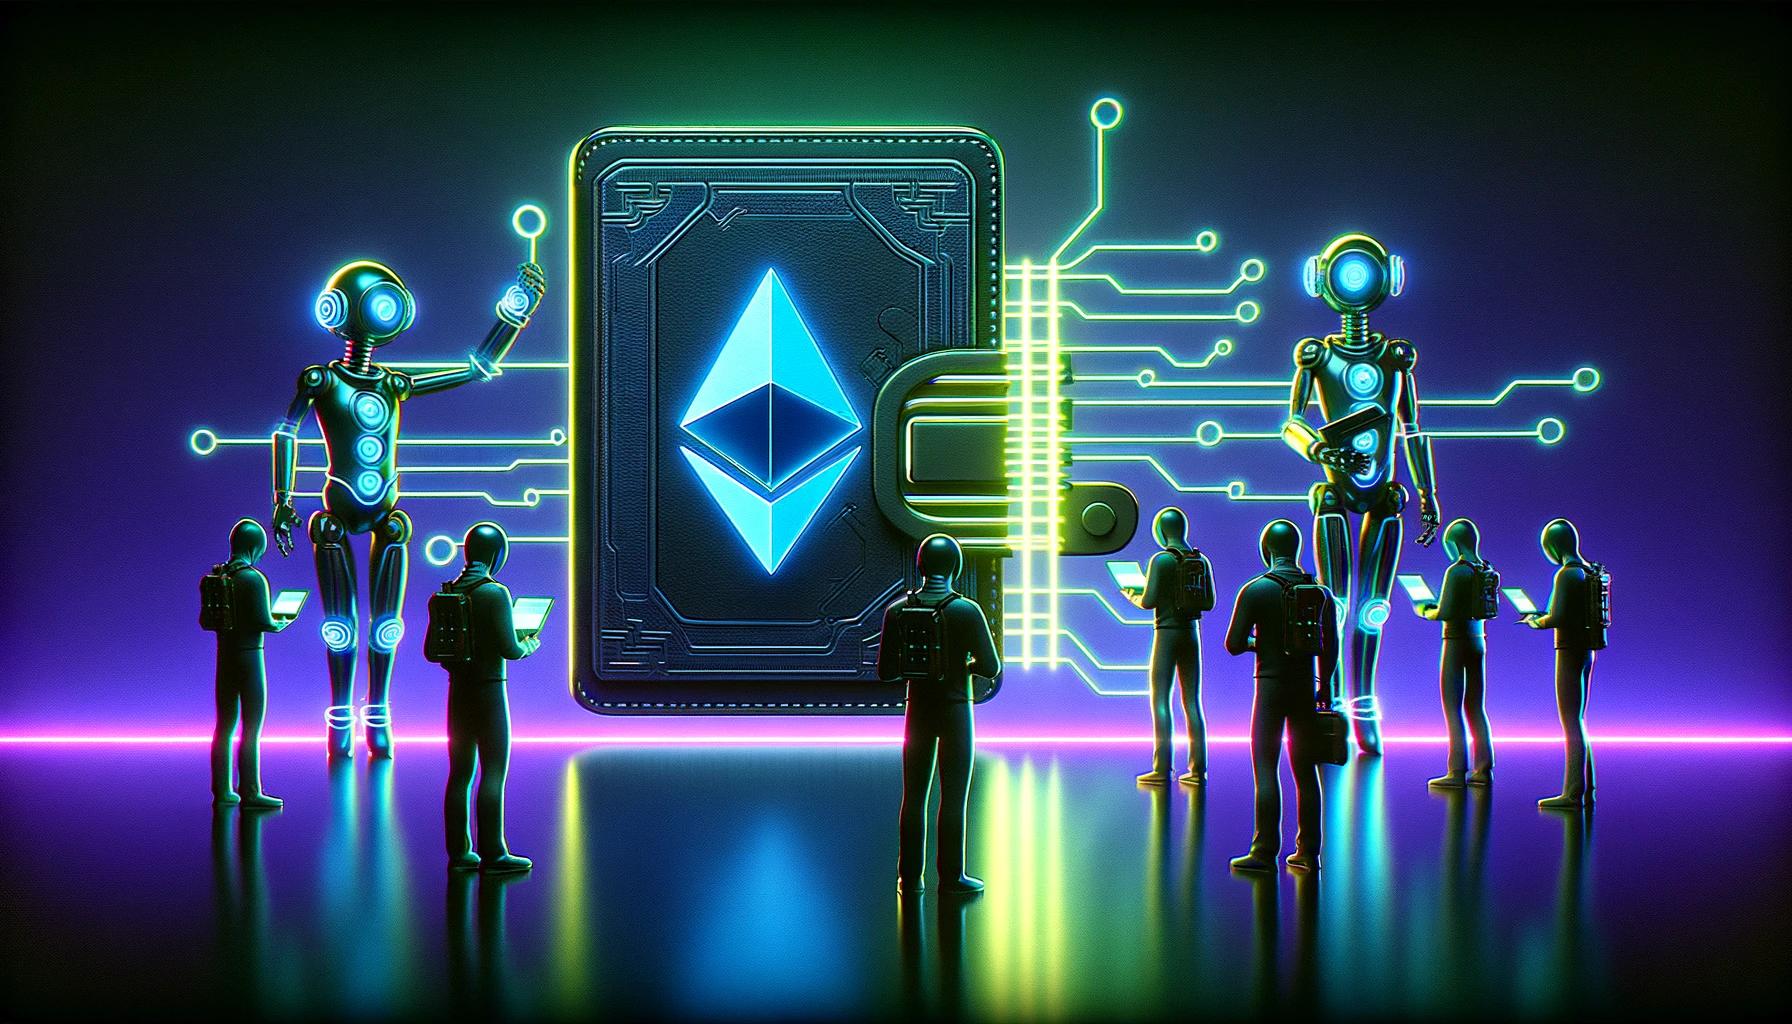 ethereum-upgrade-to-improve-wallets-but-unlock-new-attacks